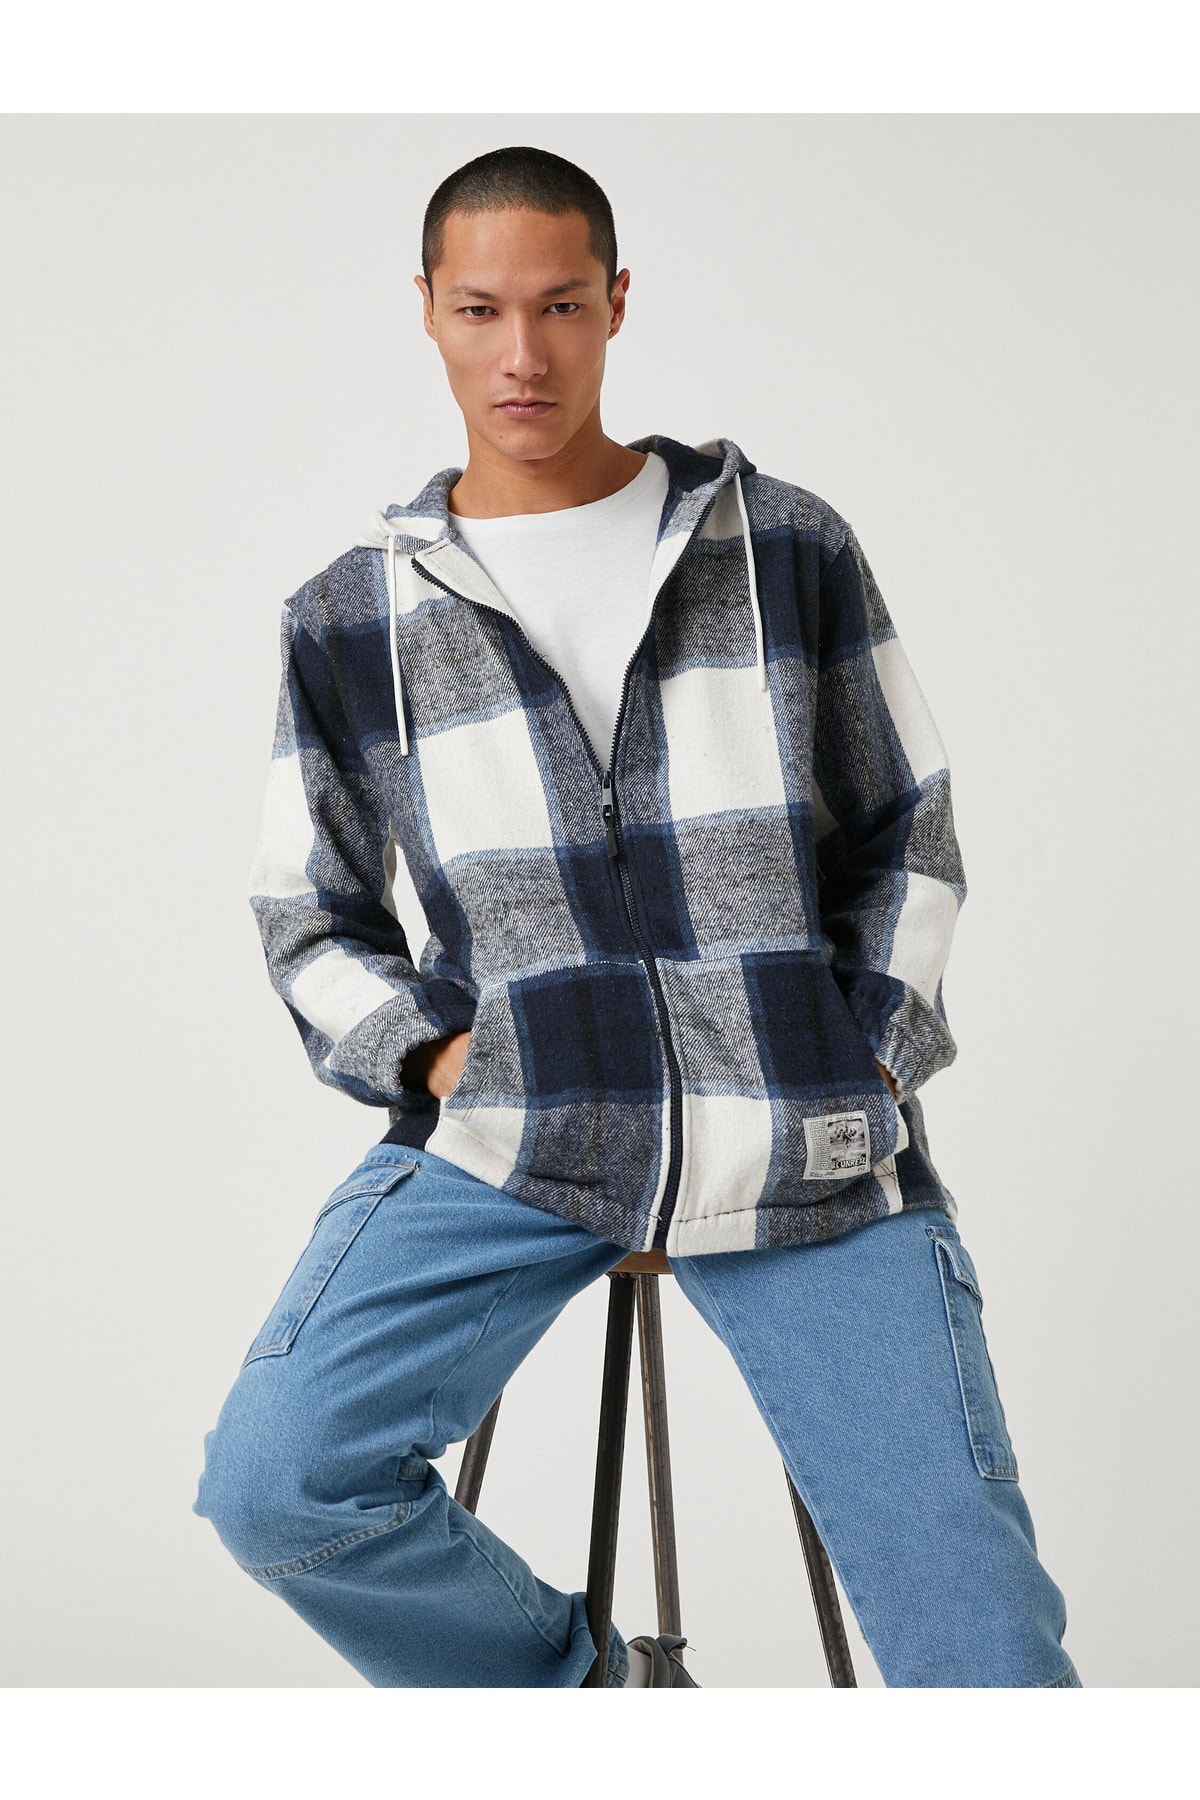 Levně Koton Checkered Patterned Sweatshirt Hoodie with Pocket Detailed Zipper.